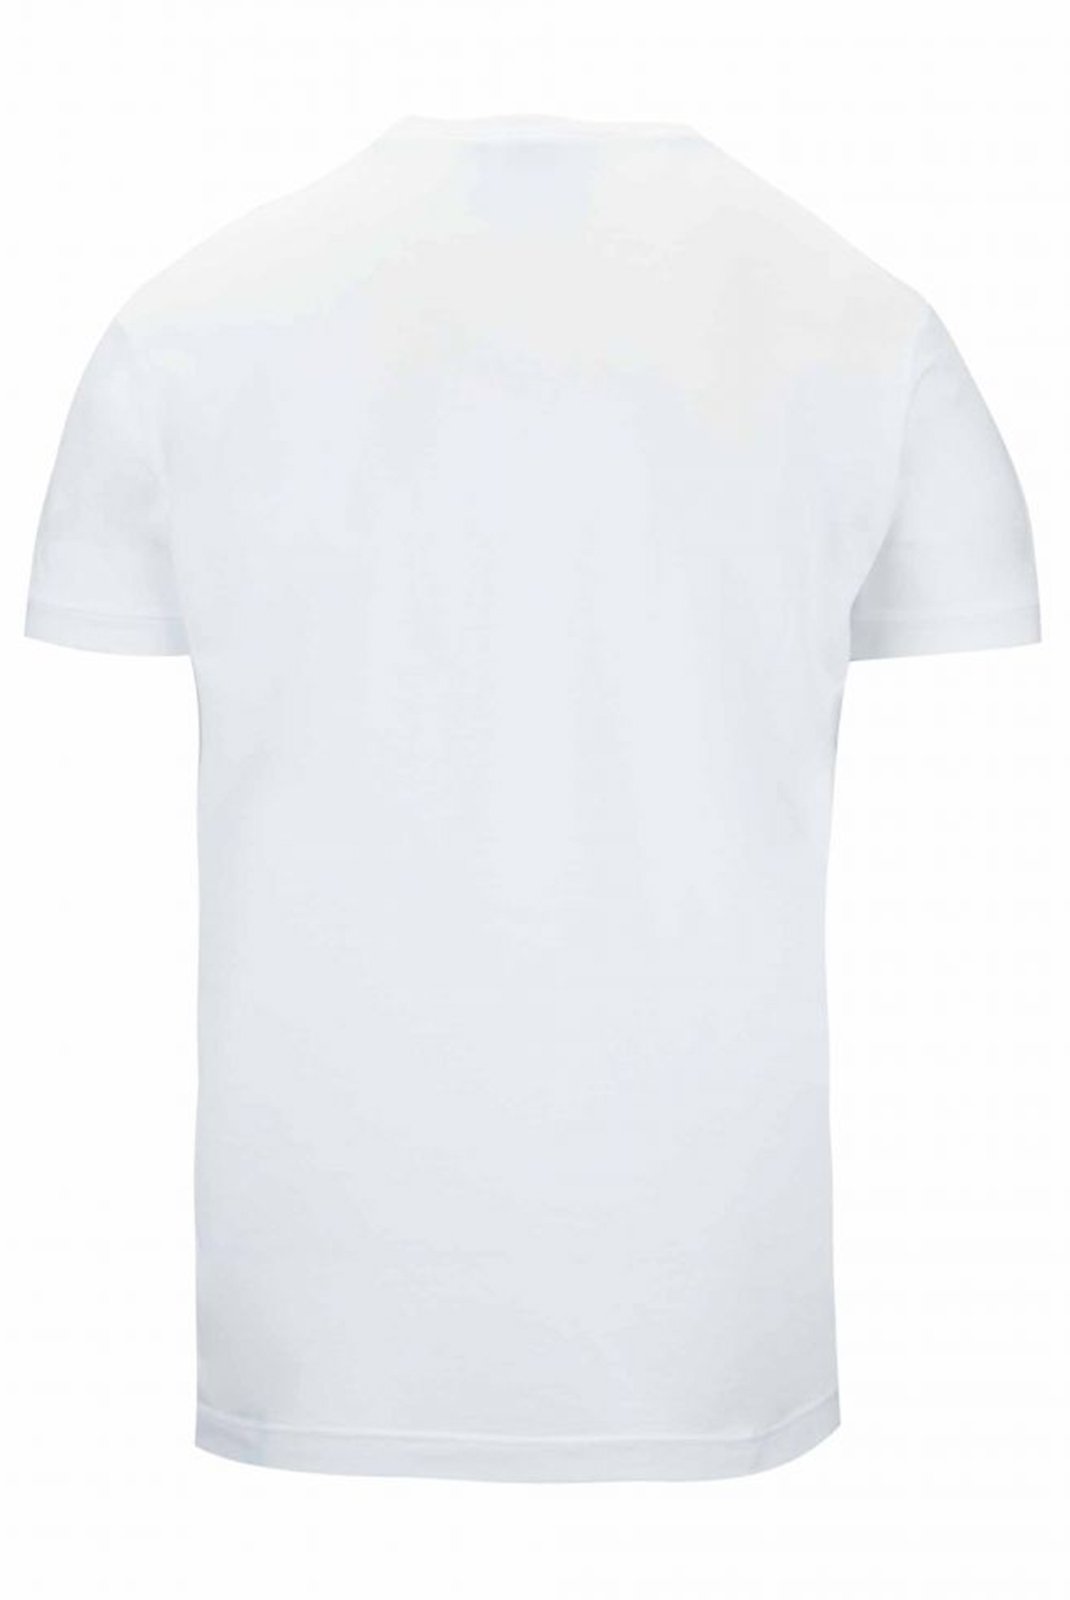 T-S manches courtes  Dsquared2 S71GD0804 100 WHITE